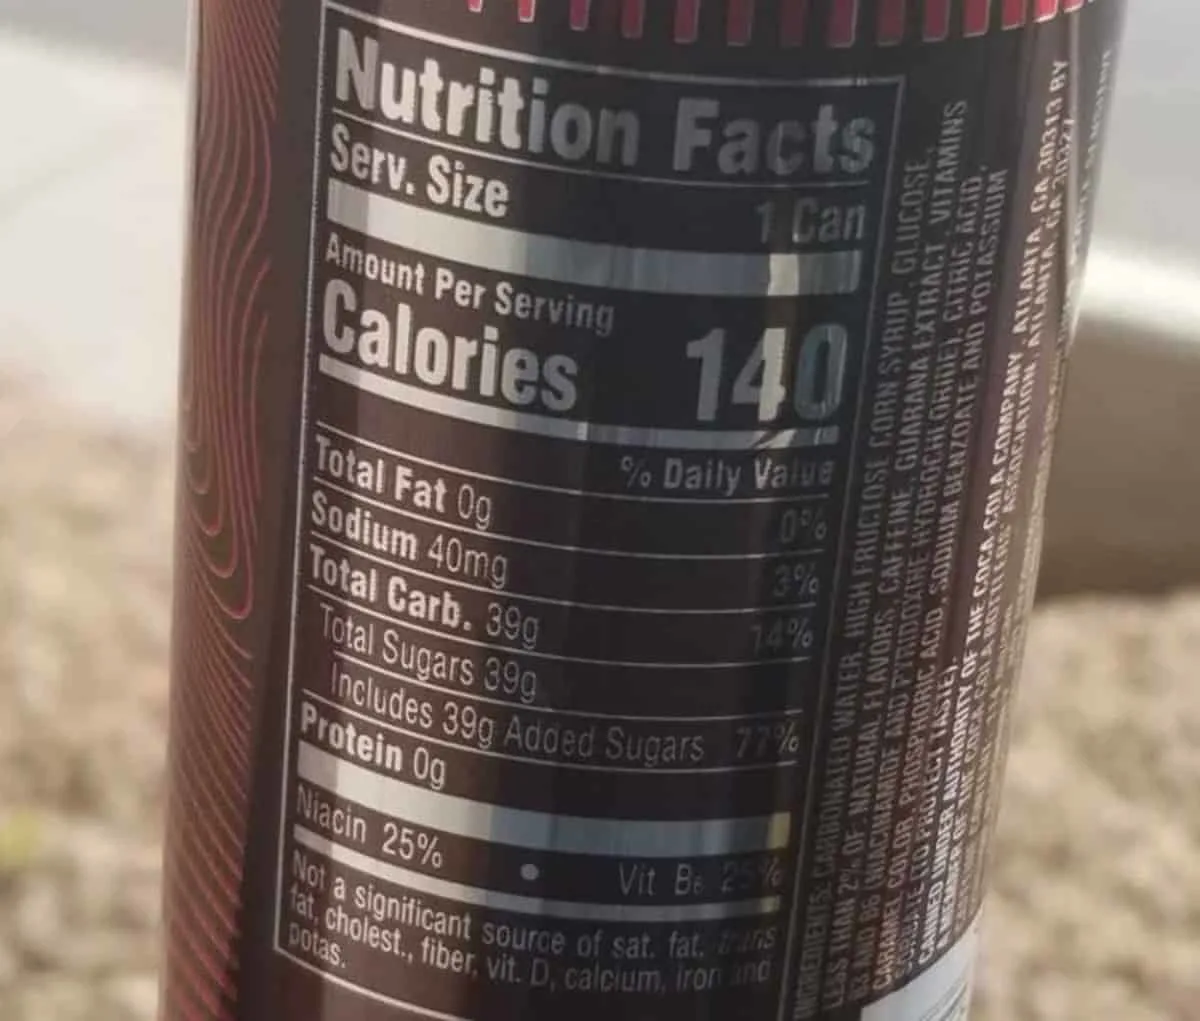 Nutrition facts label of Coca-Cola Energy drink